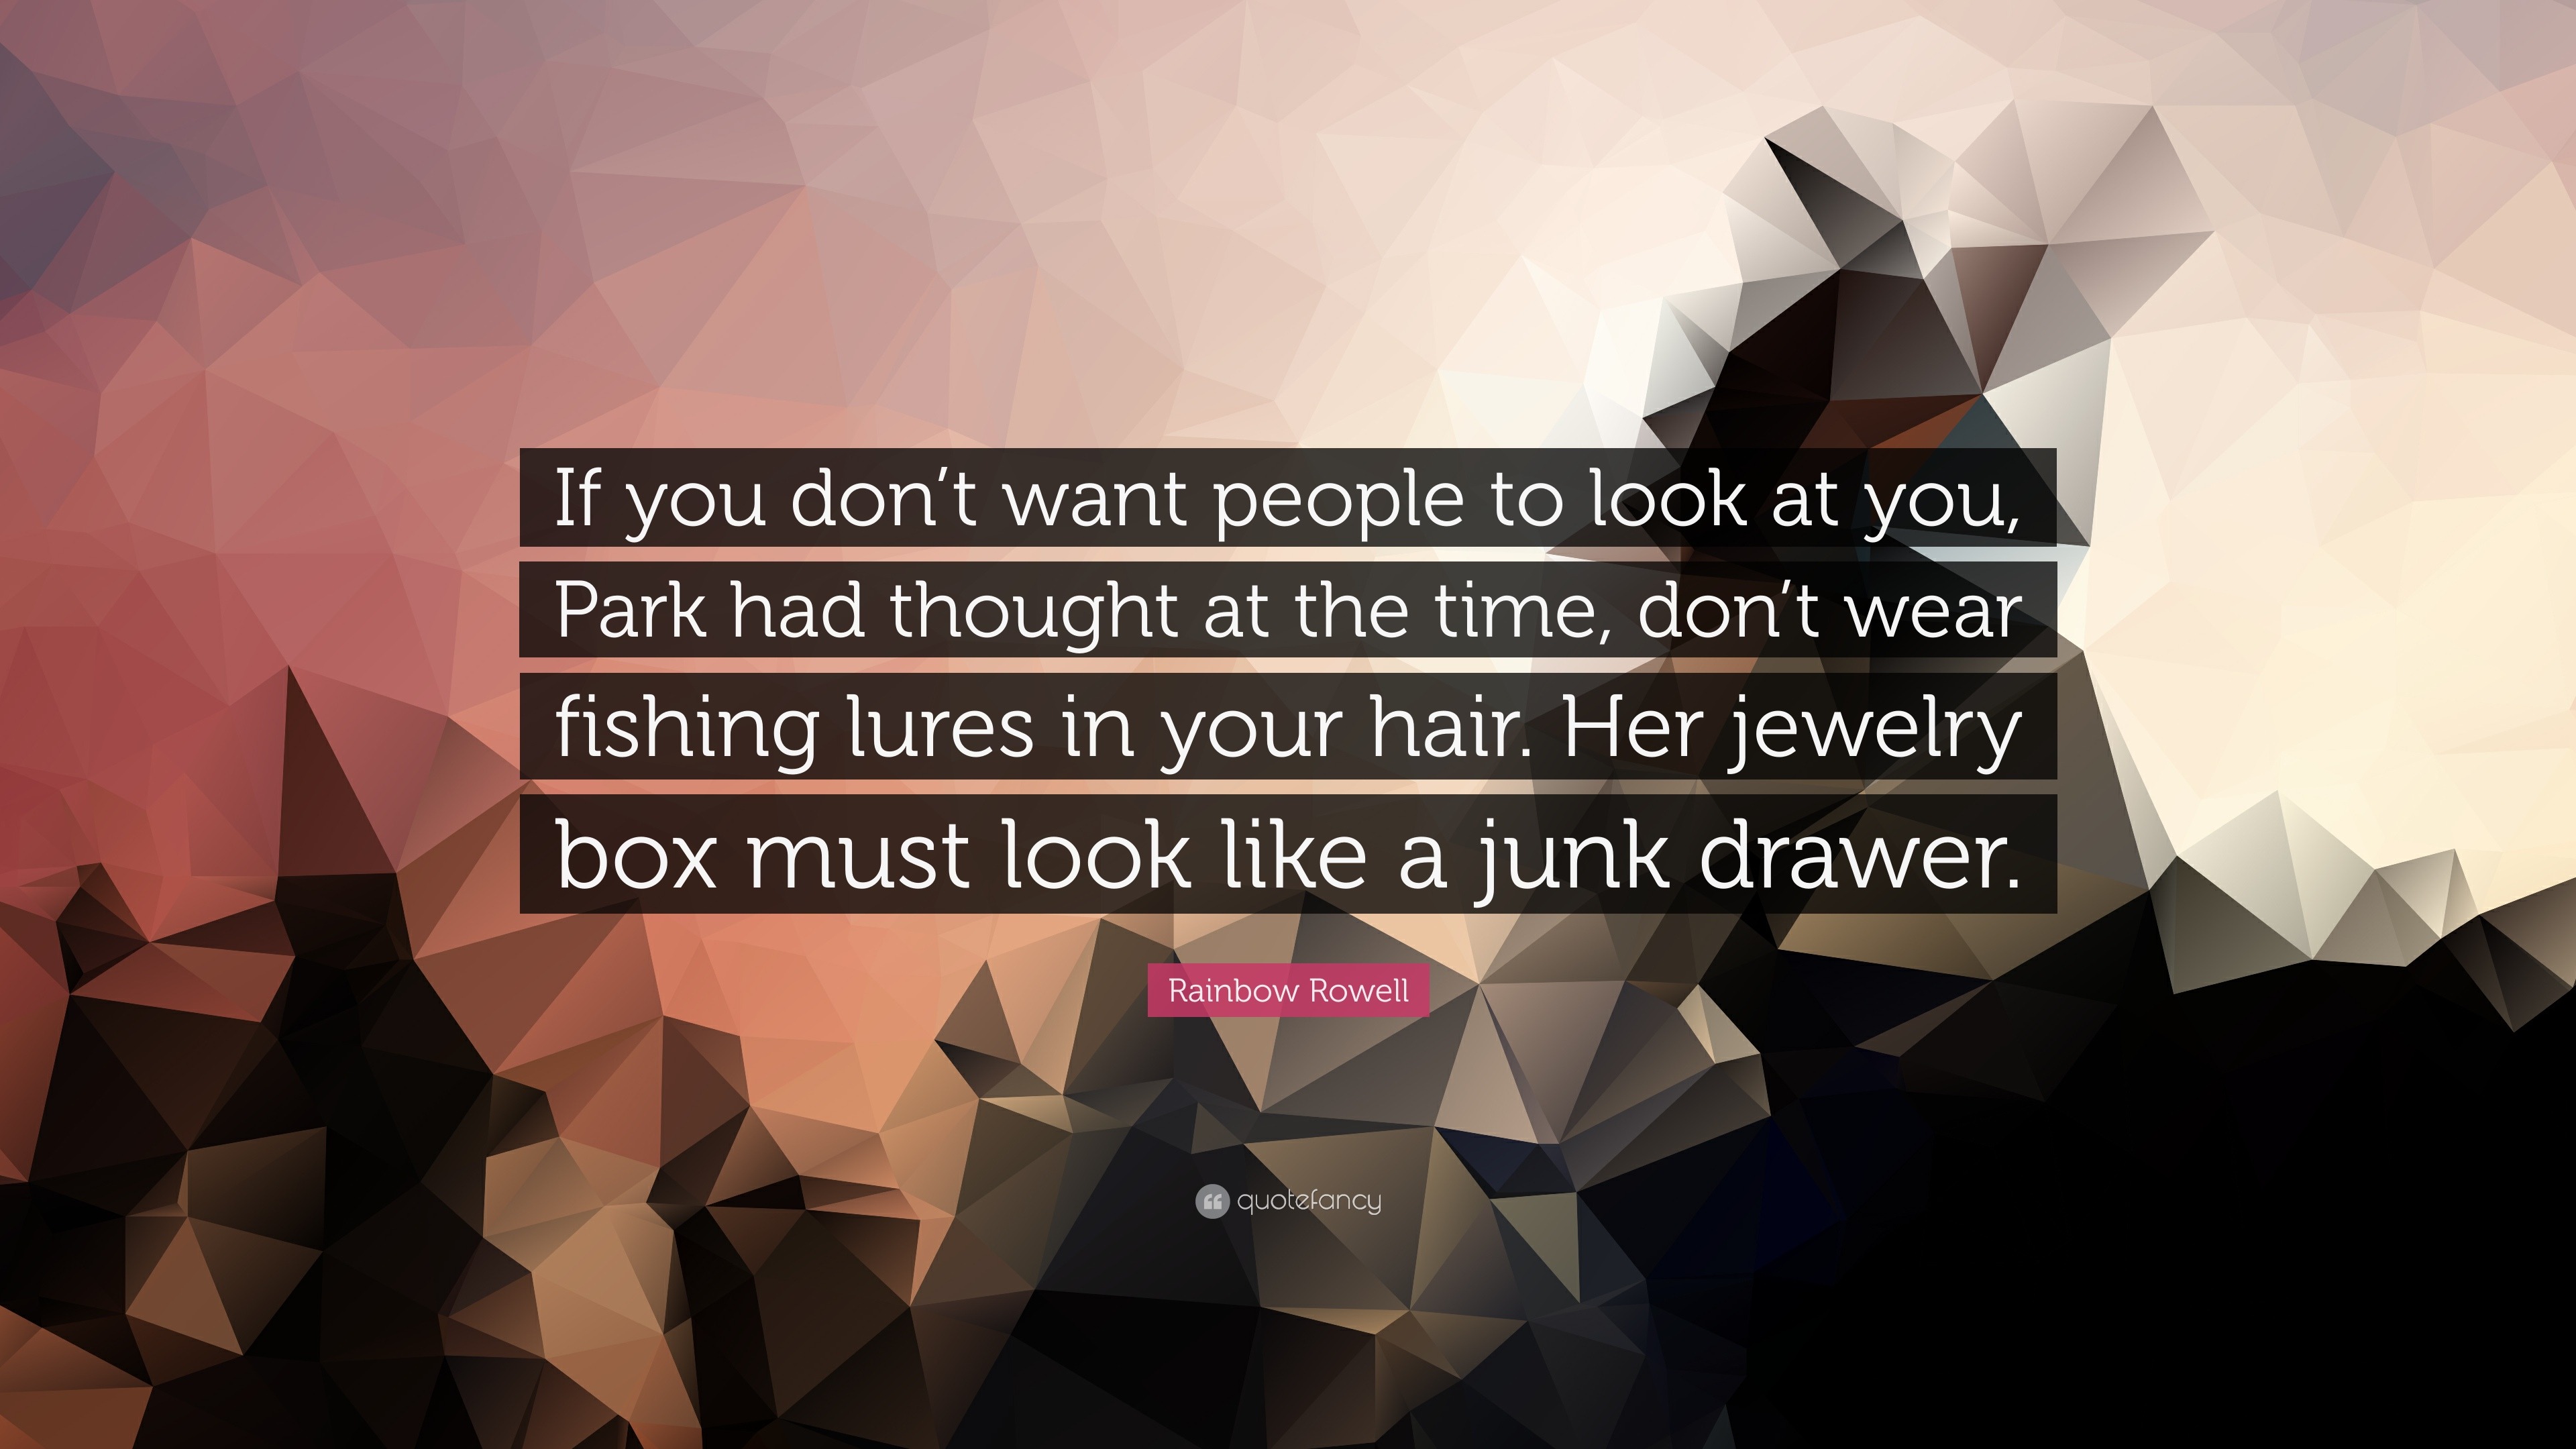 Rainbow Rowell Quote: “If you don't want people to look at you, Park had  thought at the time, don't wear fishing lures in your hair. Her jewelr...”